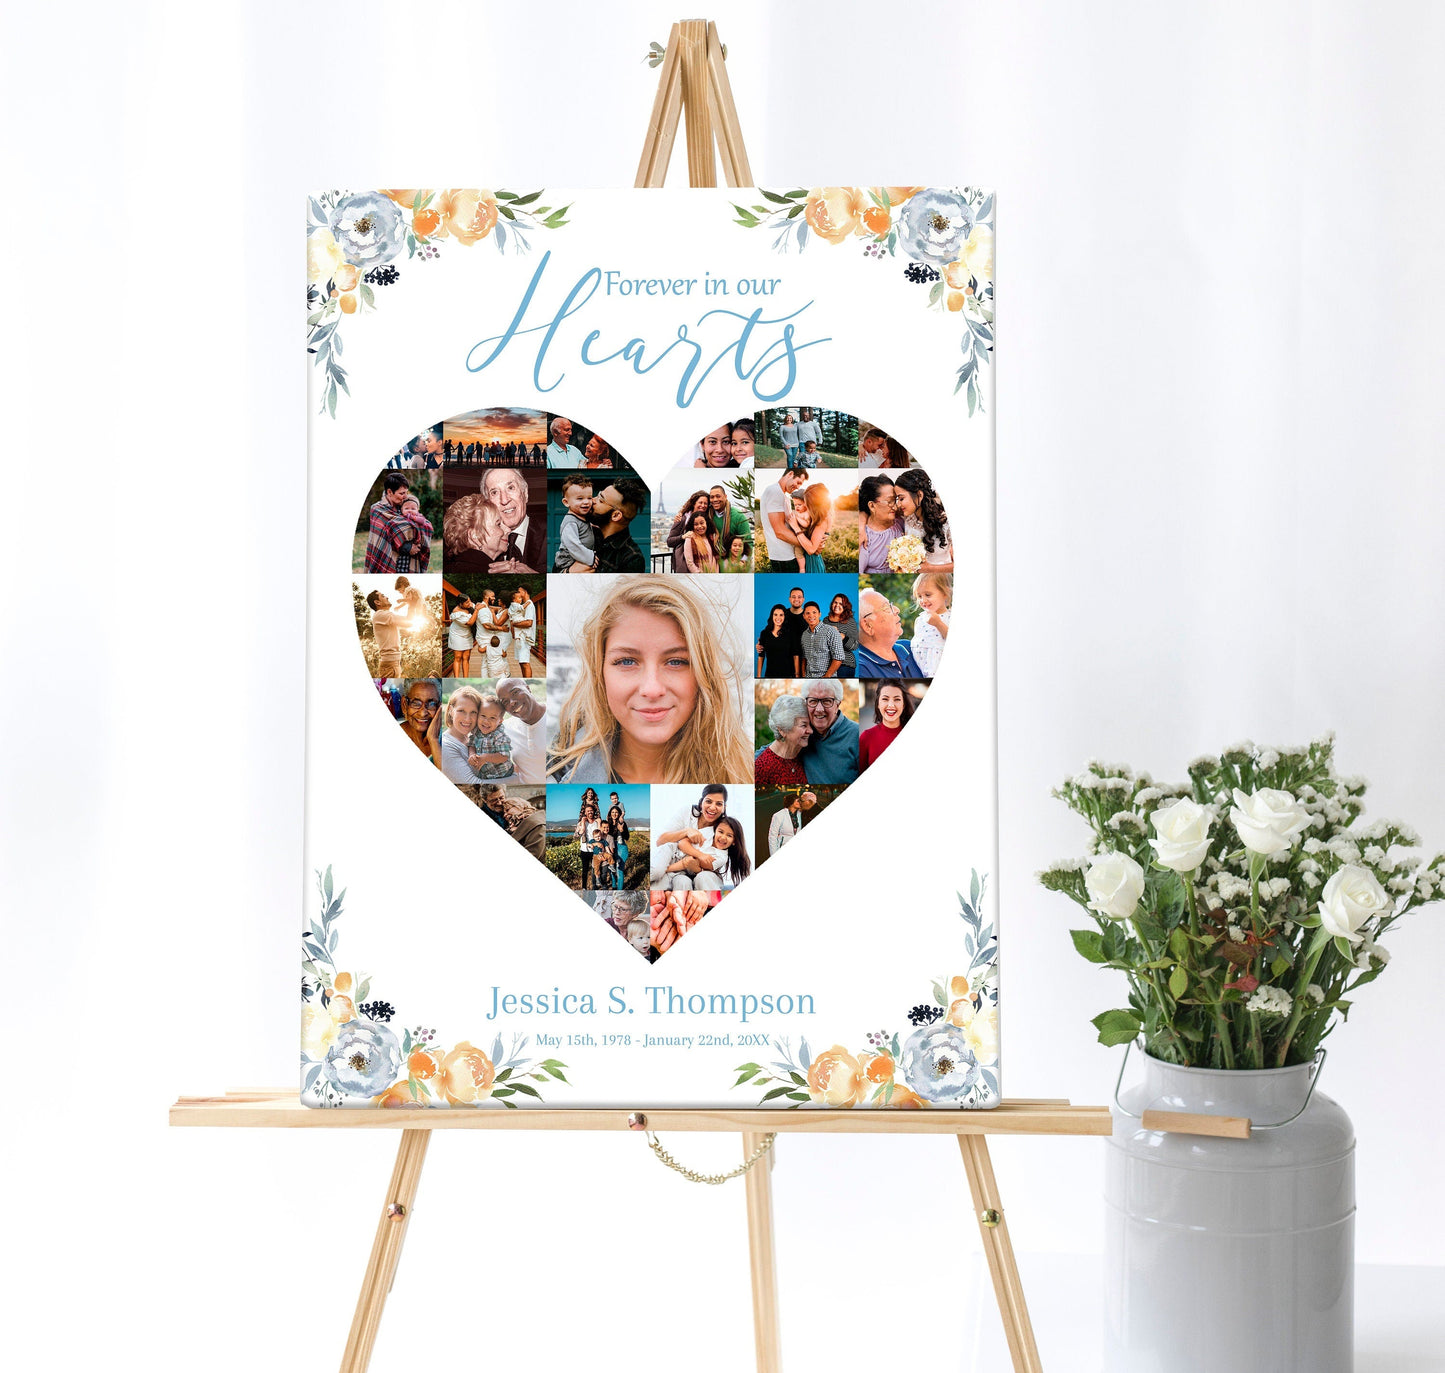 Funeral service memory board template with hearts